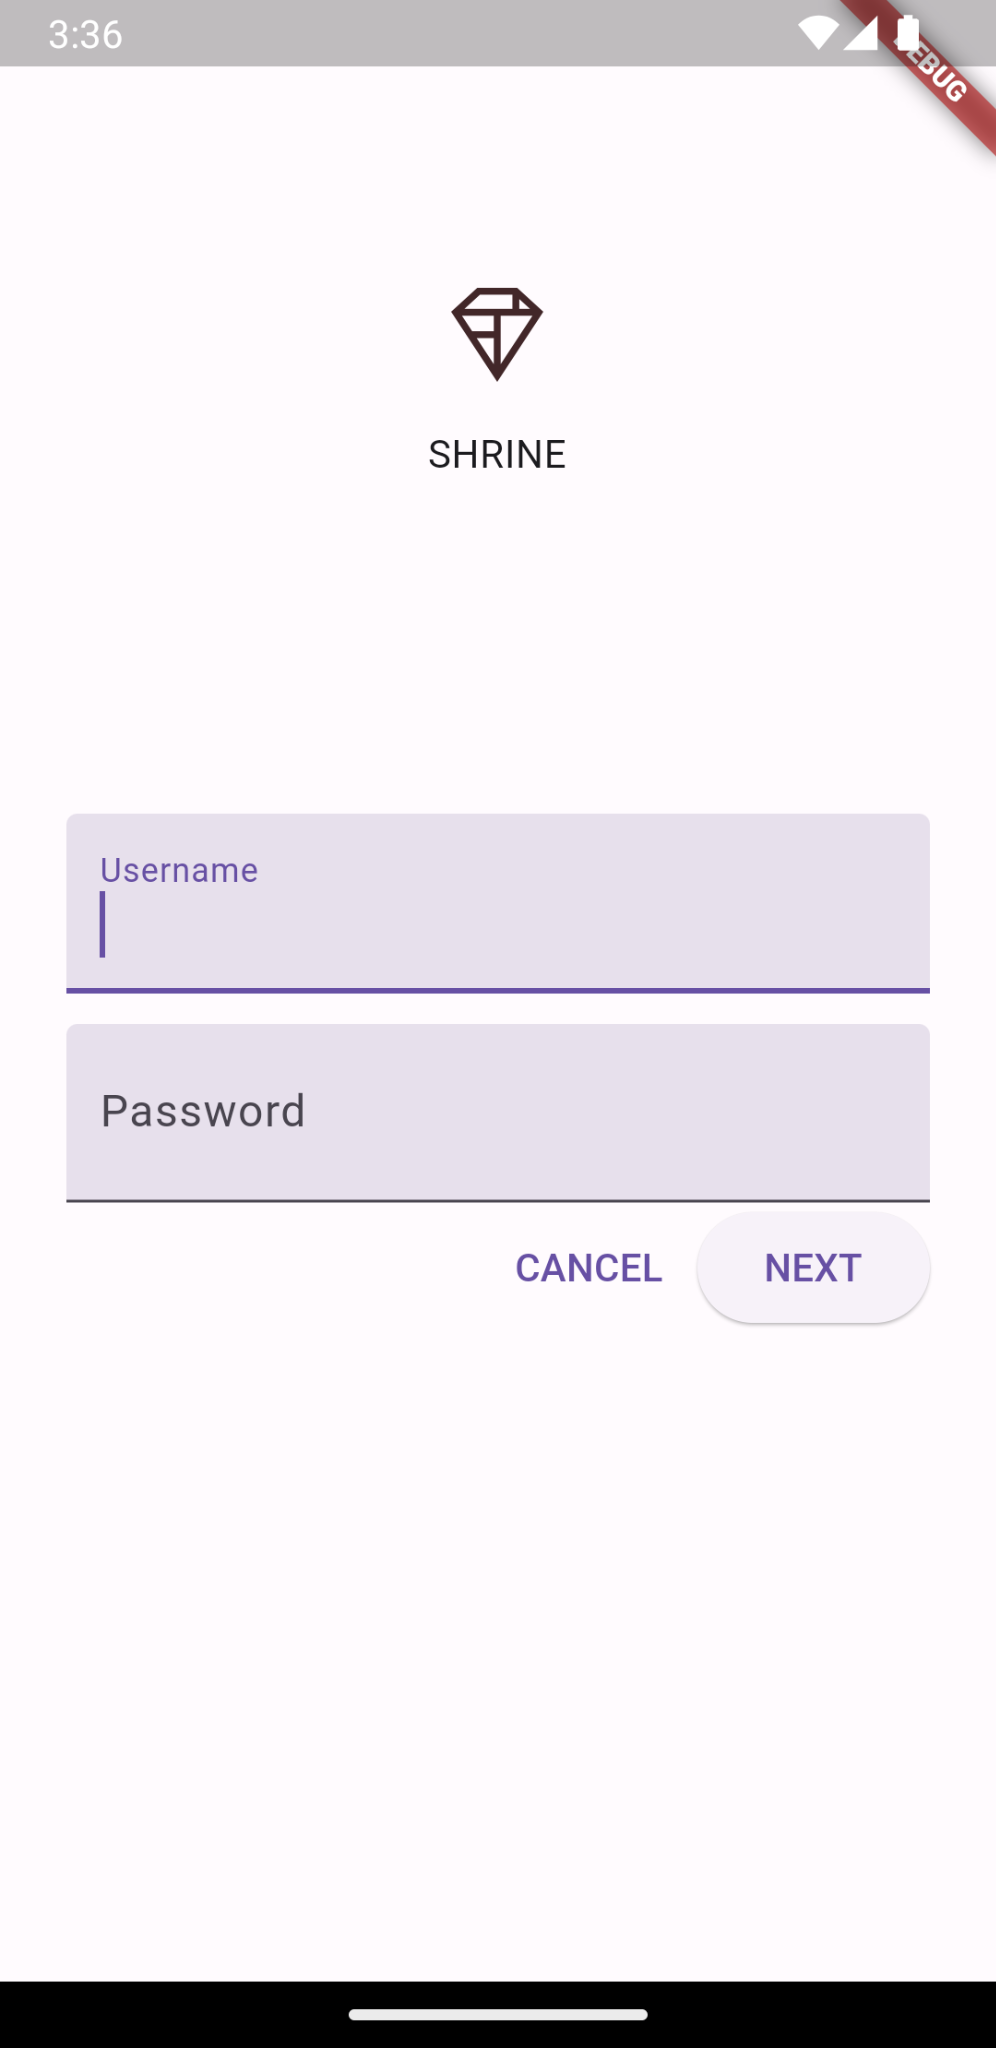 login page with username and password fields, cancel and next buttons